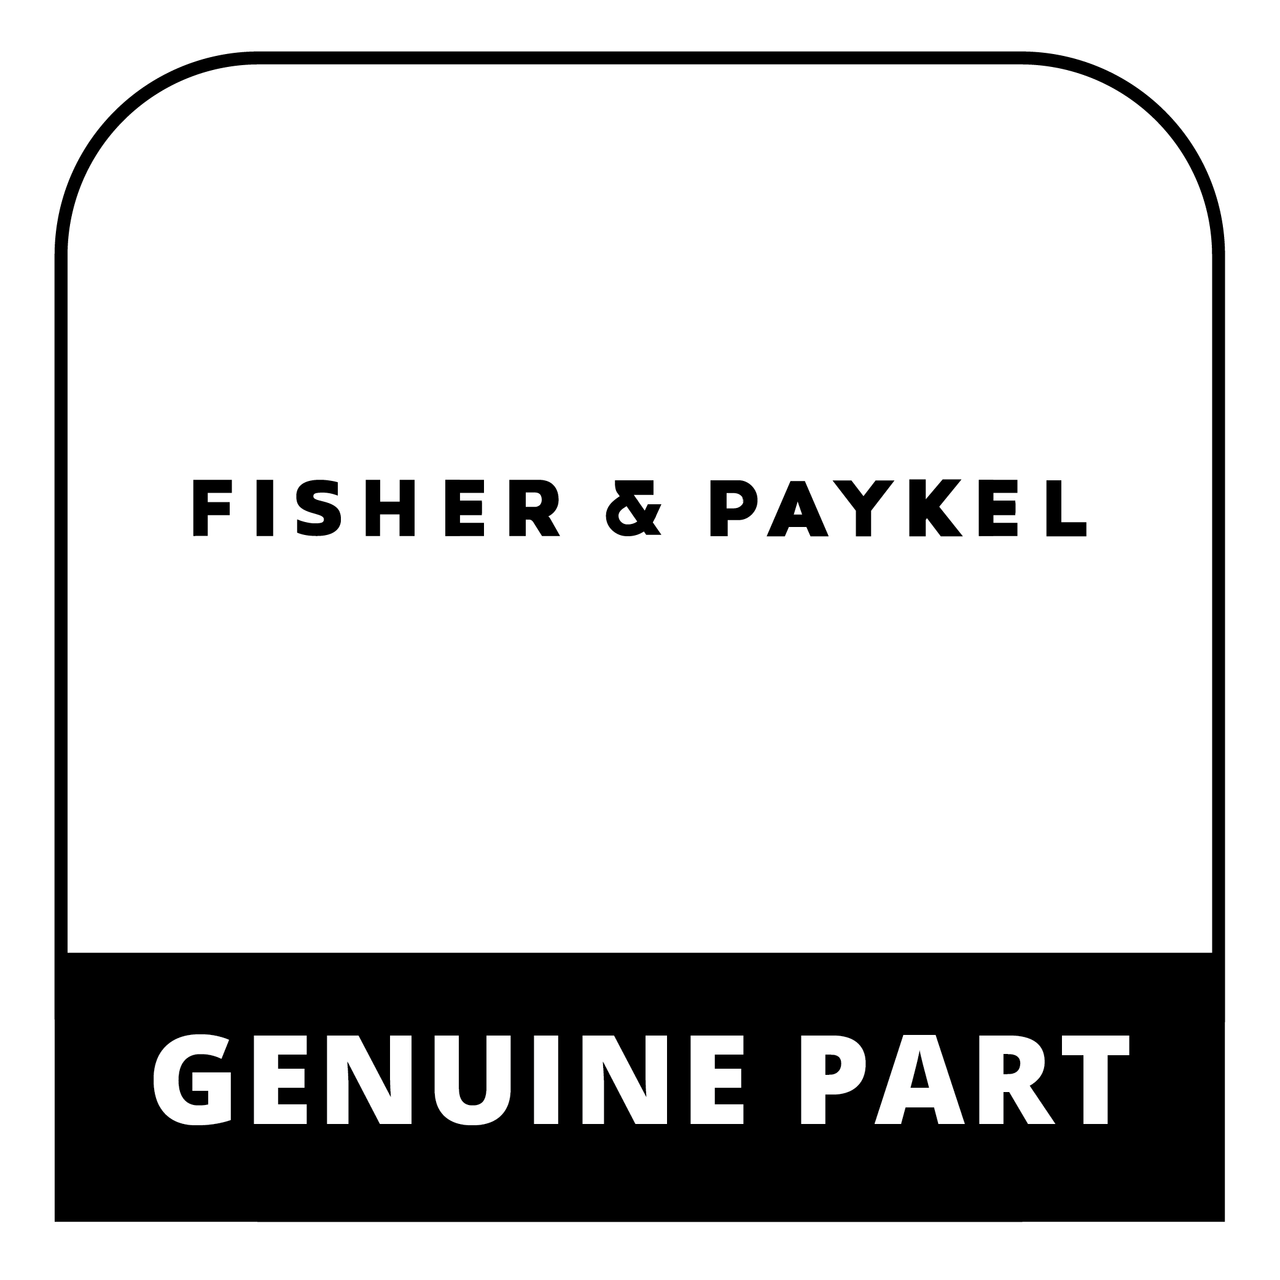 Fisher & Paykel 860690 - Rail Shelf Dr Rf195A - Genuine Fisher & Paykel (DCS) Part